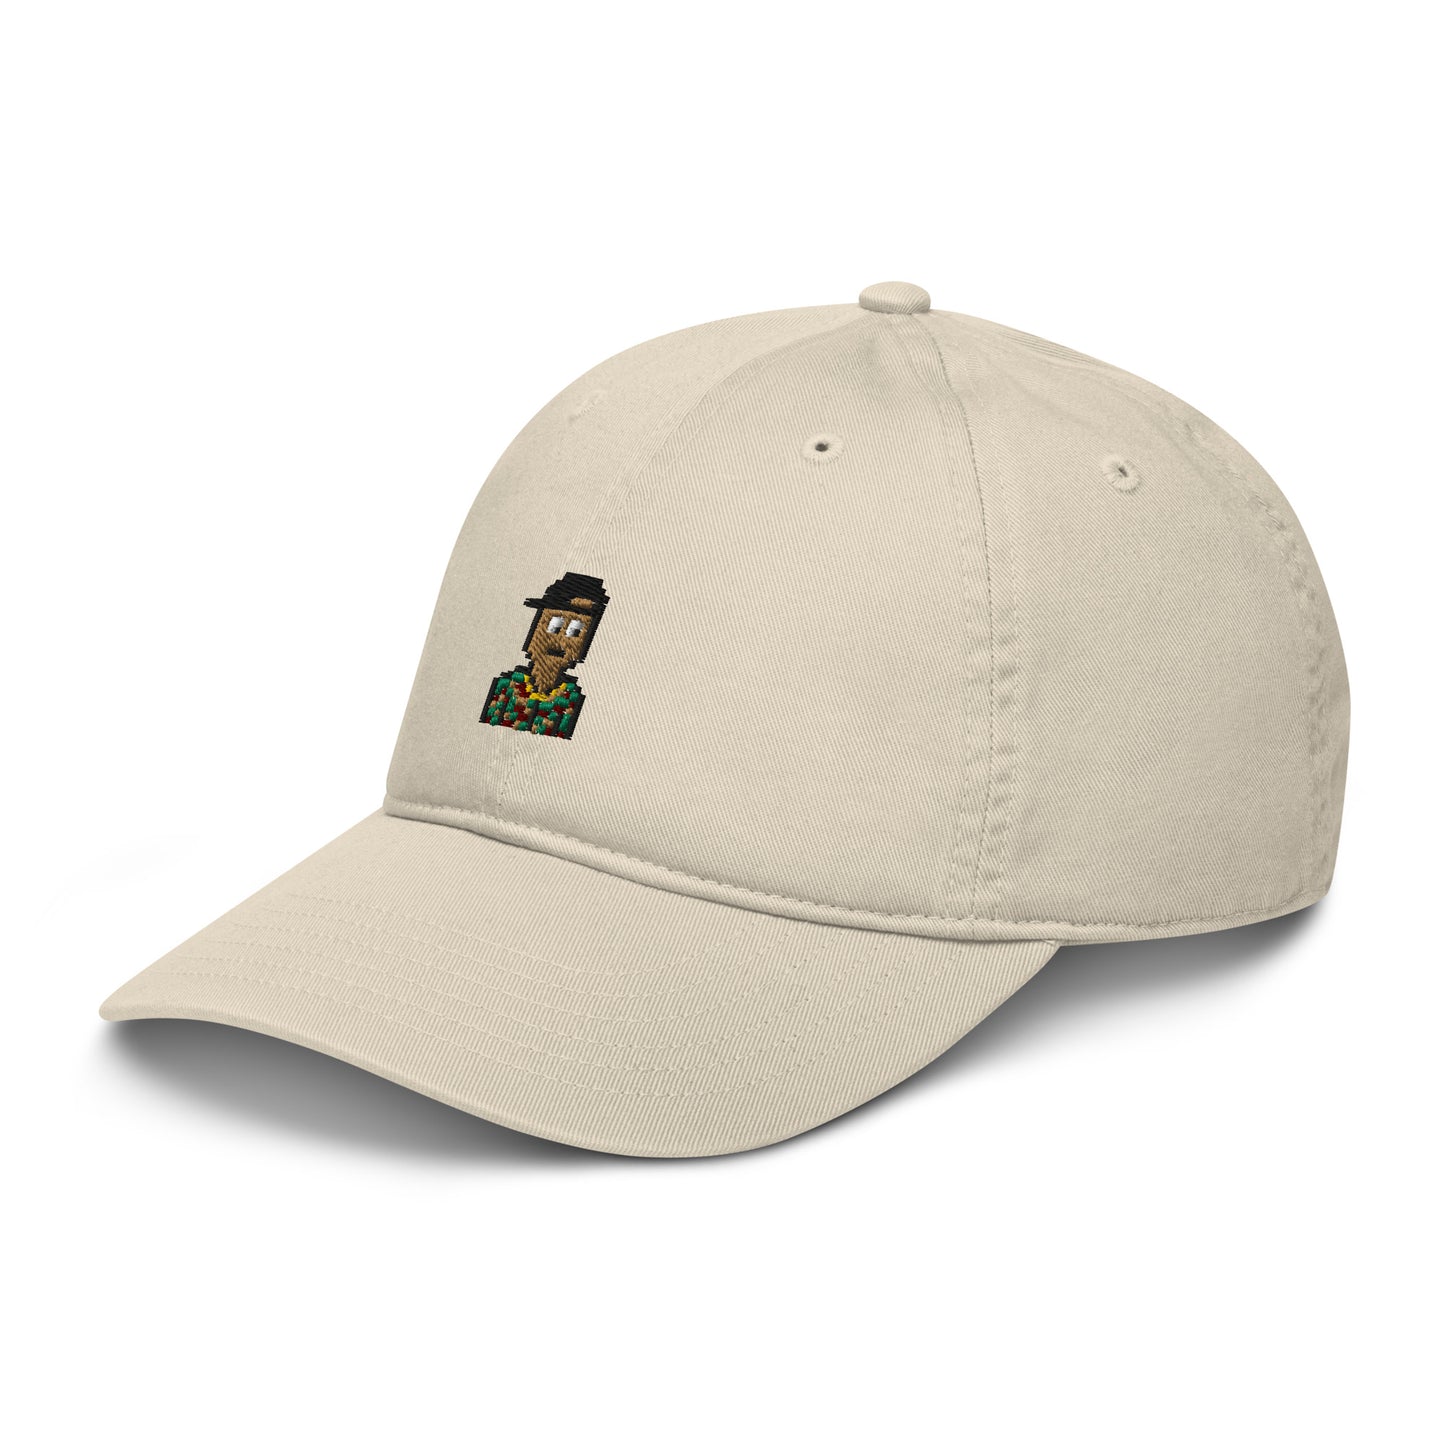 Organic dad hat feat. Nakamigos #12679 (embroidered)